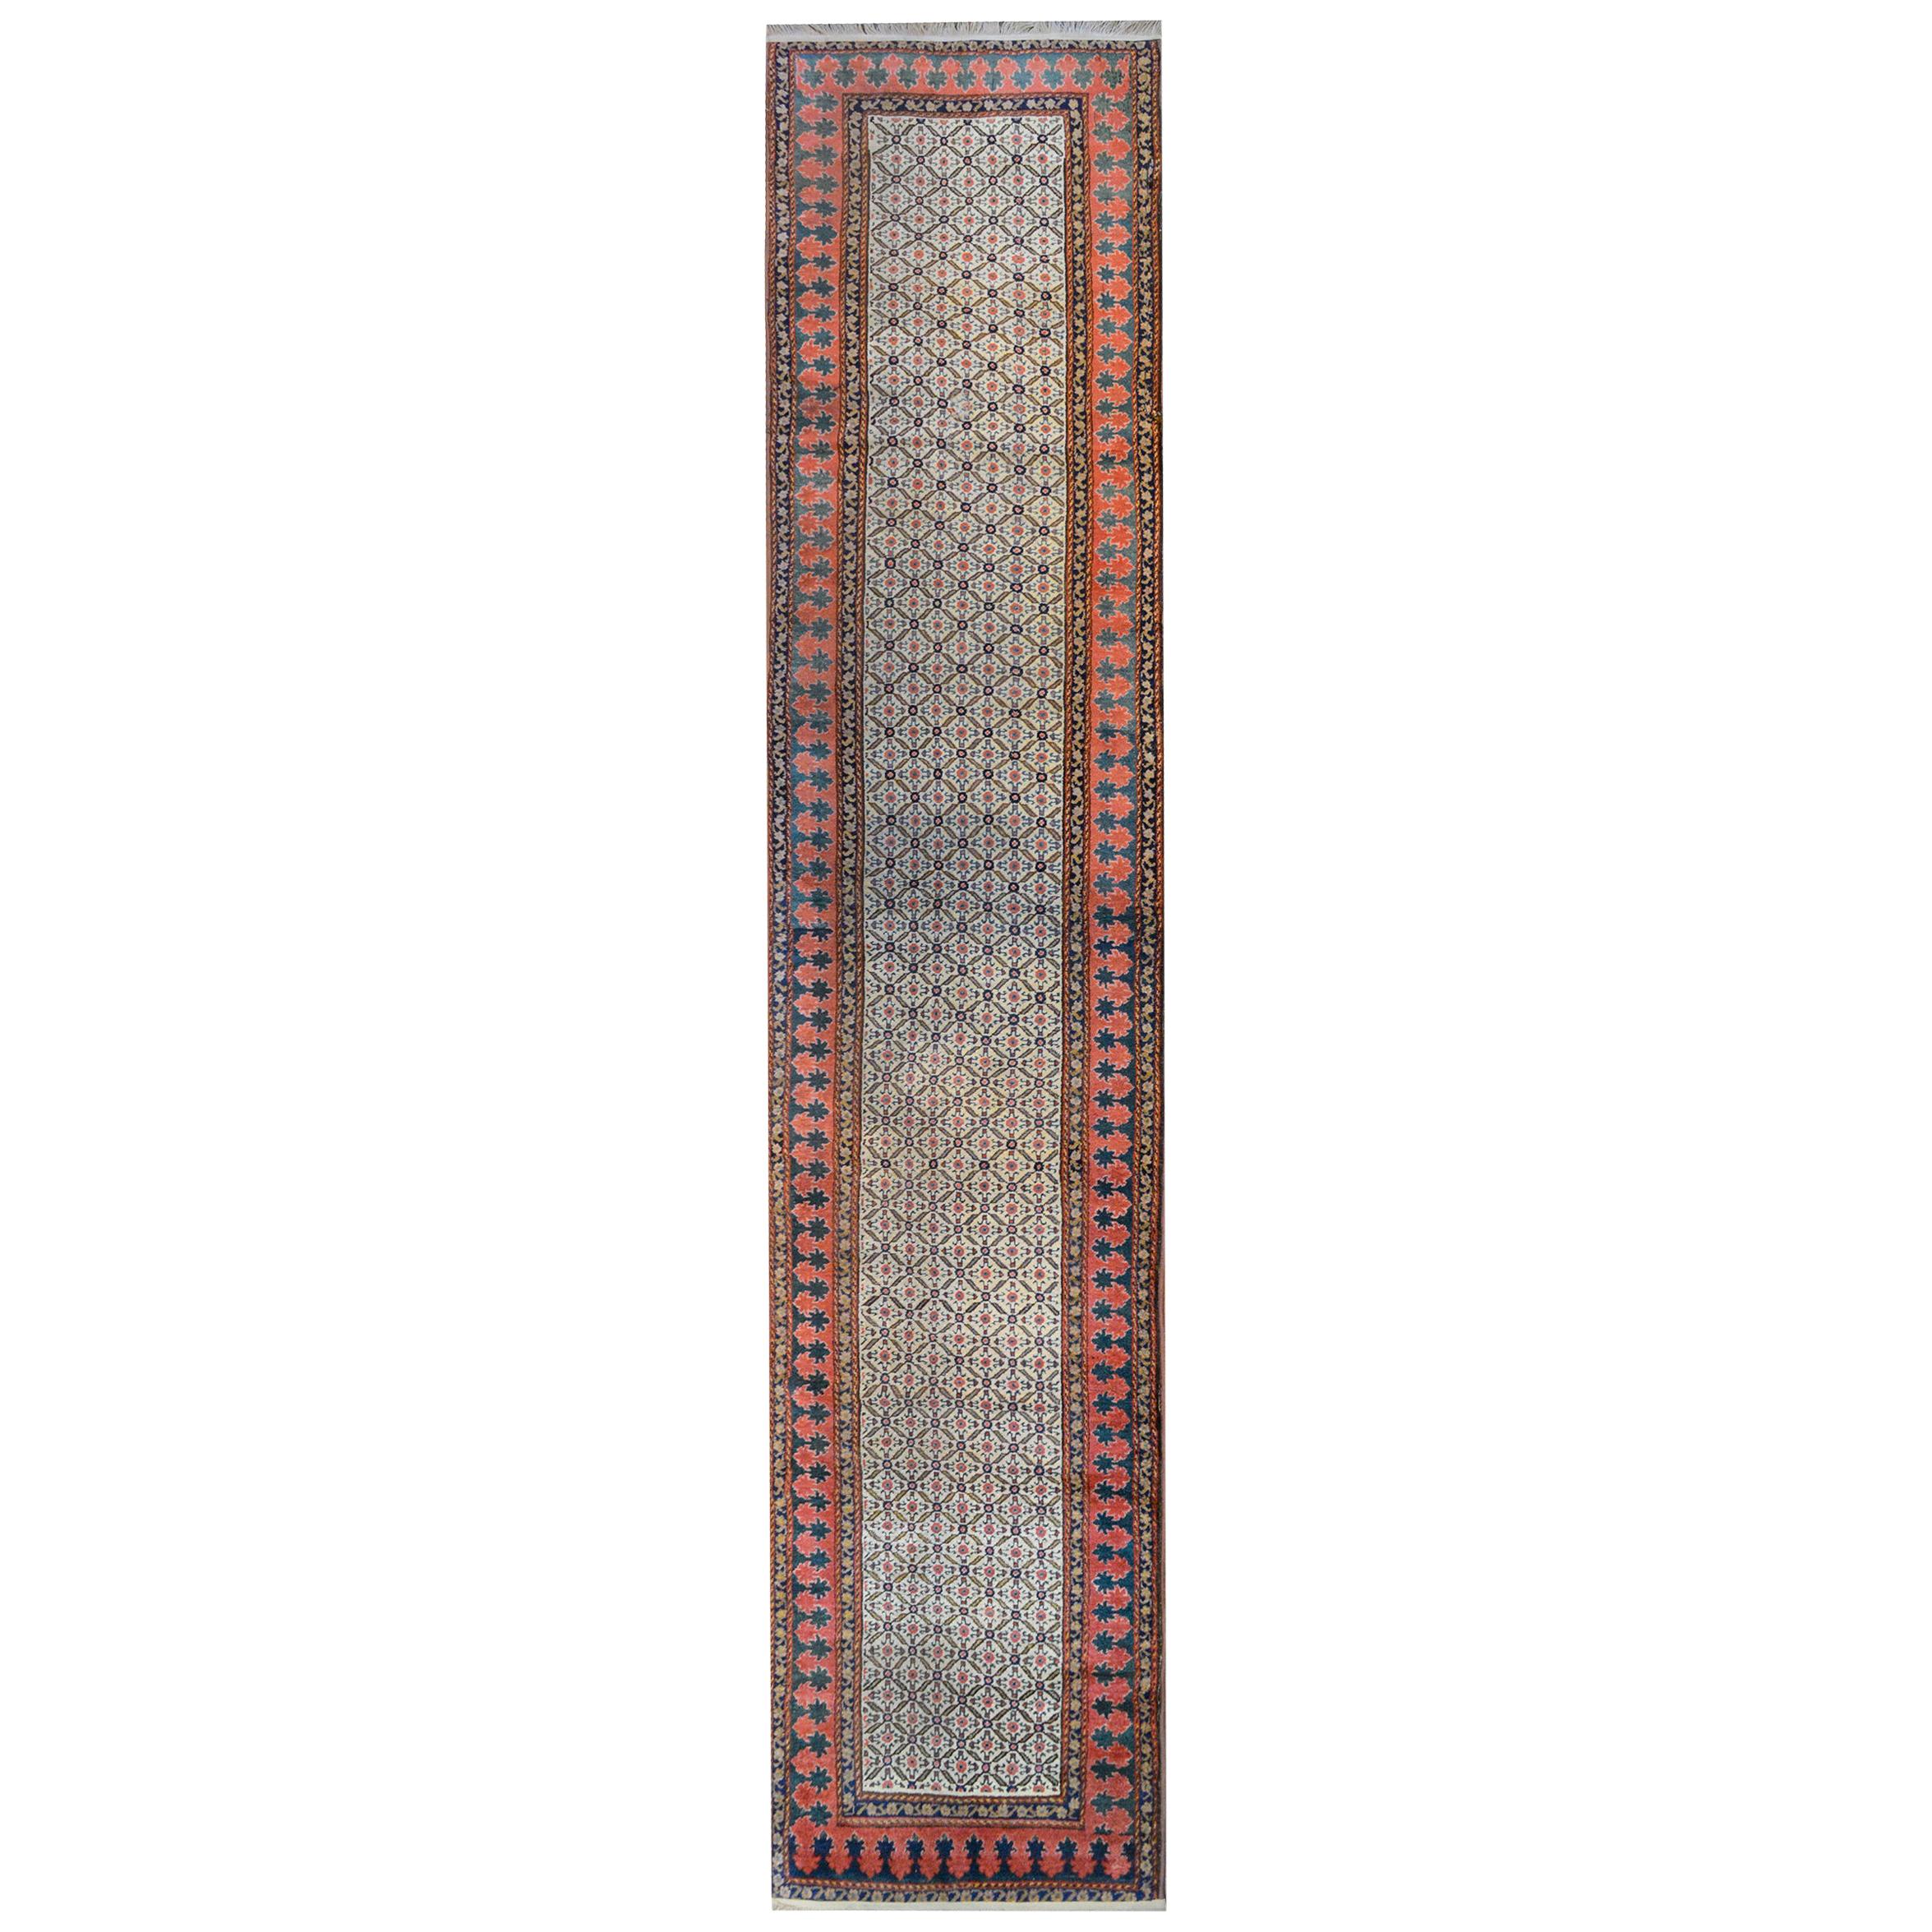 Exceptional Early 20th Century Malayer Runner For Sale